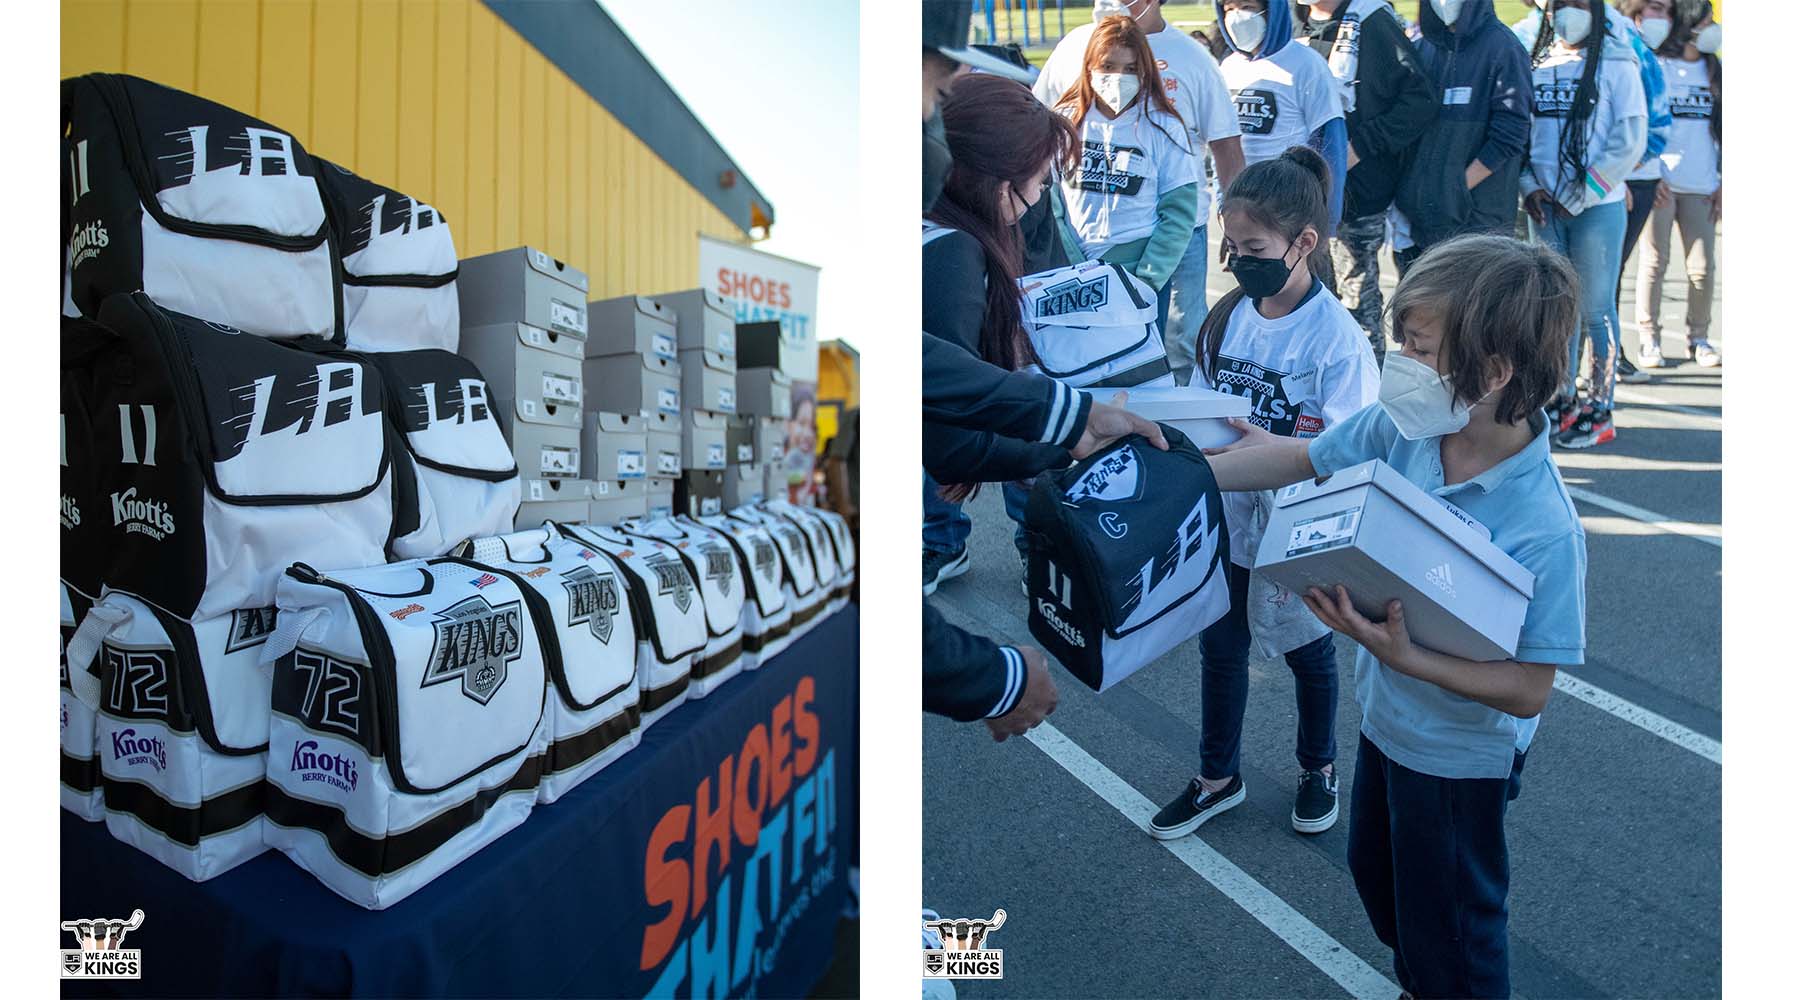 LA Kings Shoes That Fit event with elementary school students. 